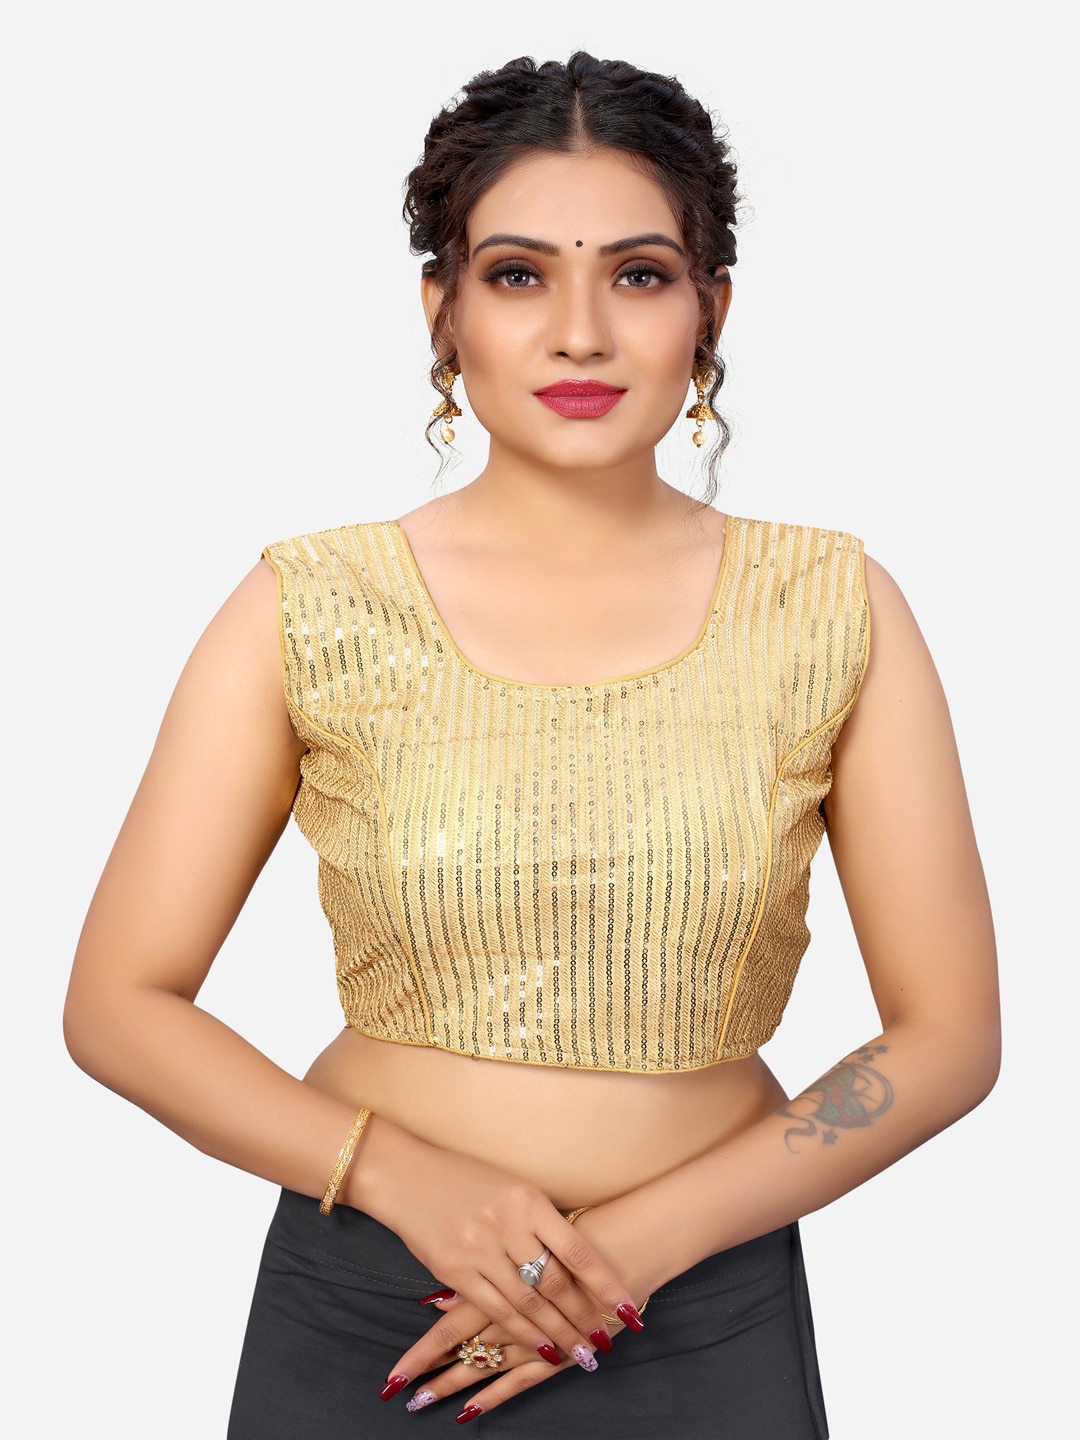 SIRIL Women Golden Embellished Padded Saree Blouse Price in India